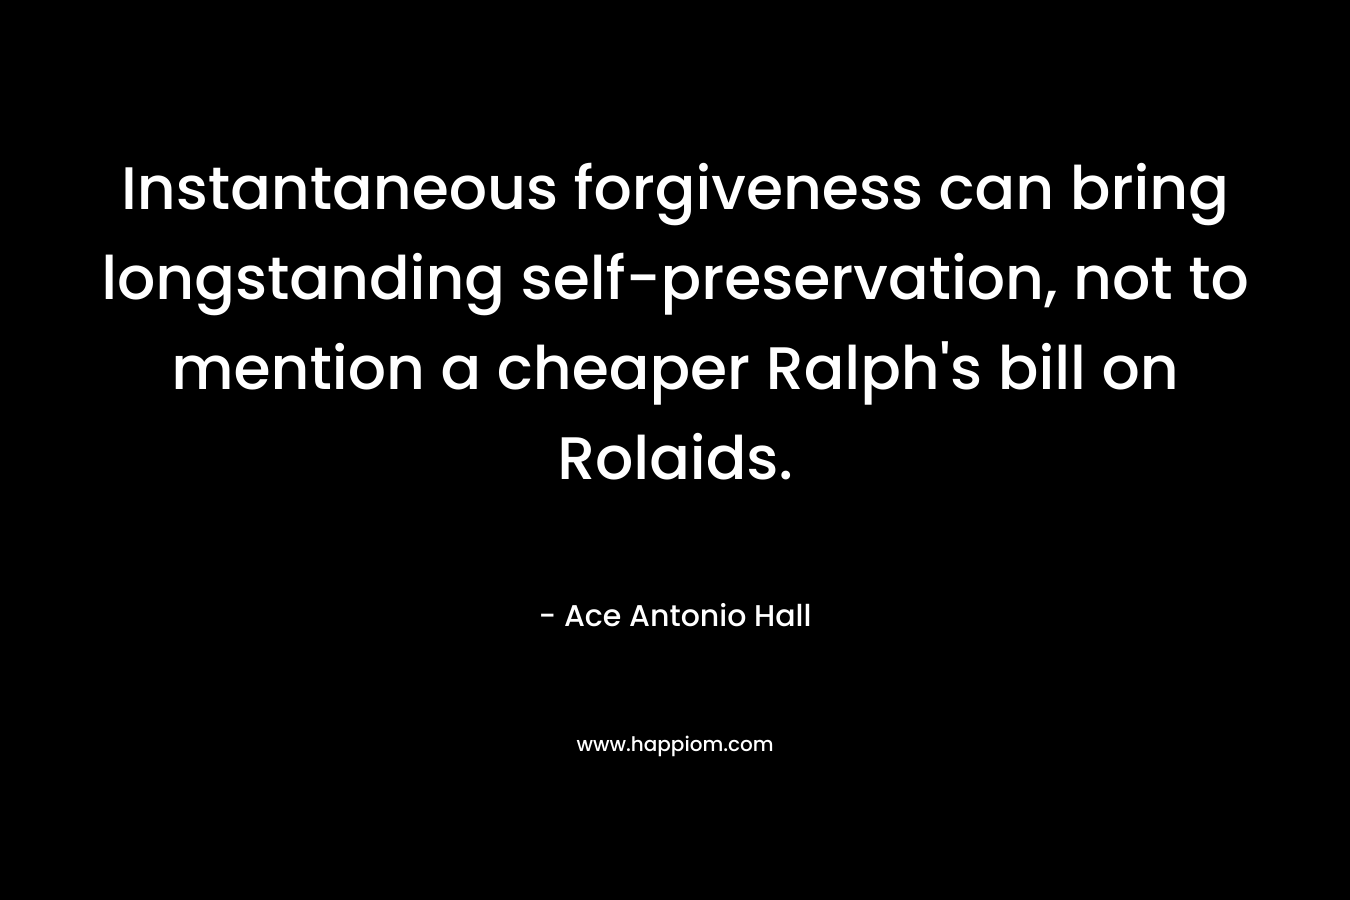 Instantaneous forgiveness can bring longstanding self-preservation, not to mention a cheaper Ralph's bill on Rolaids.